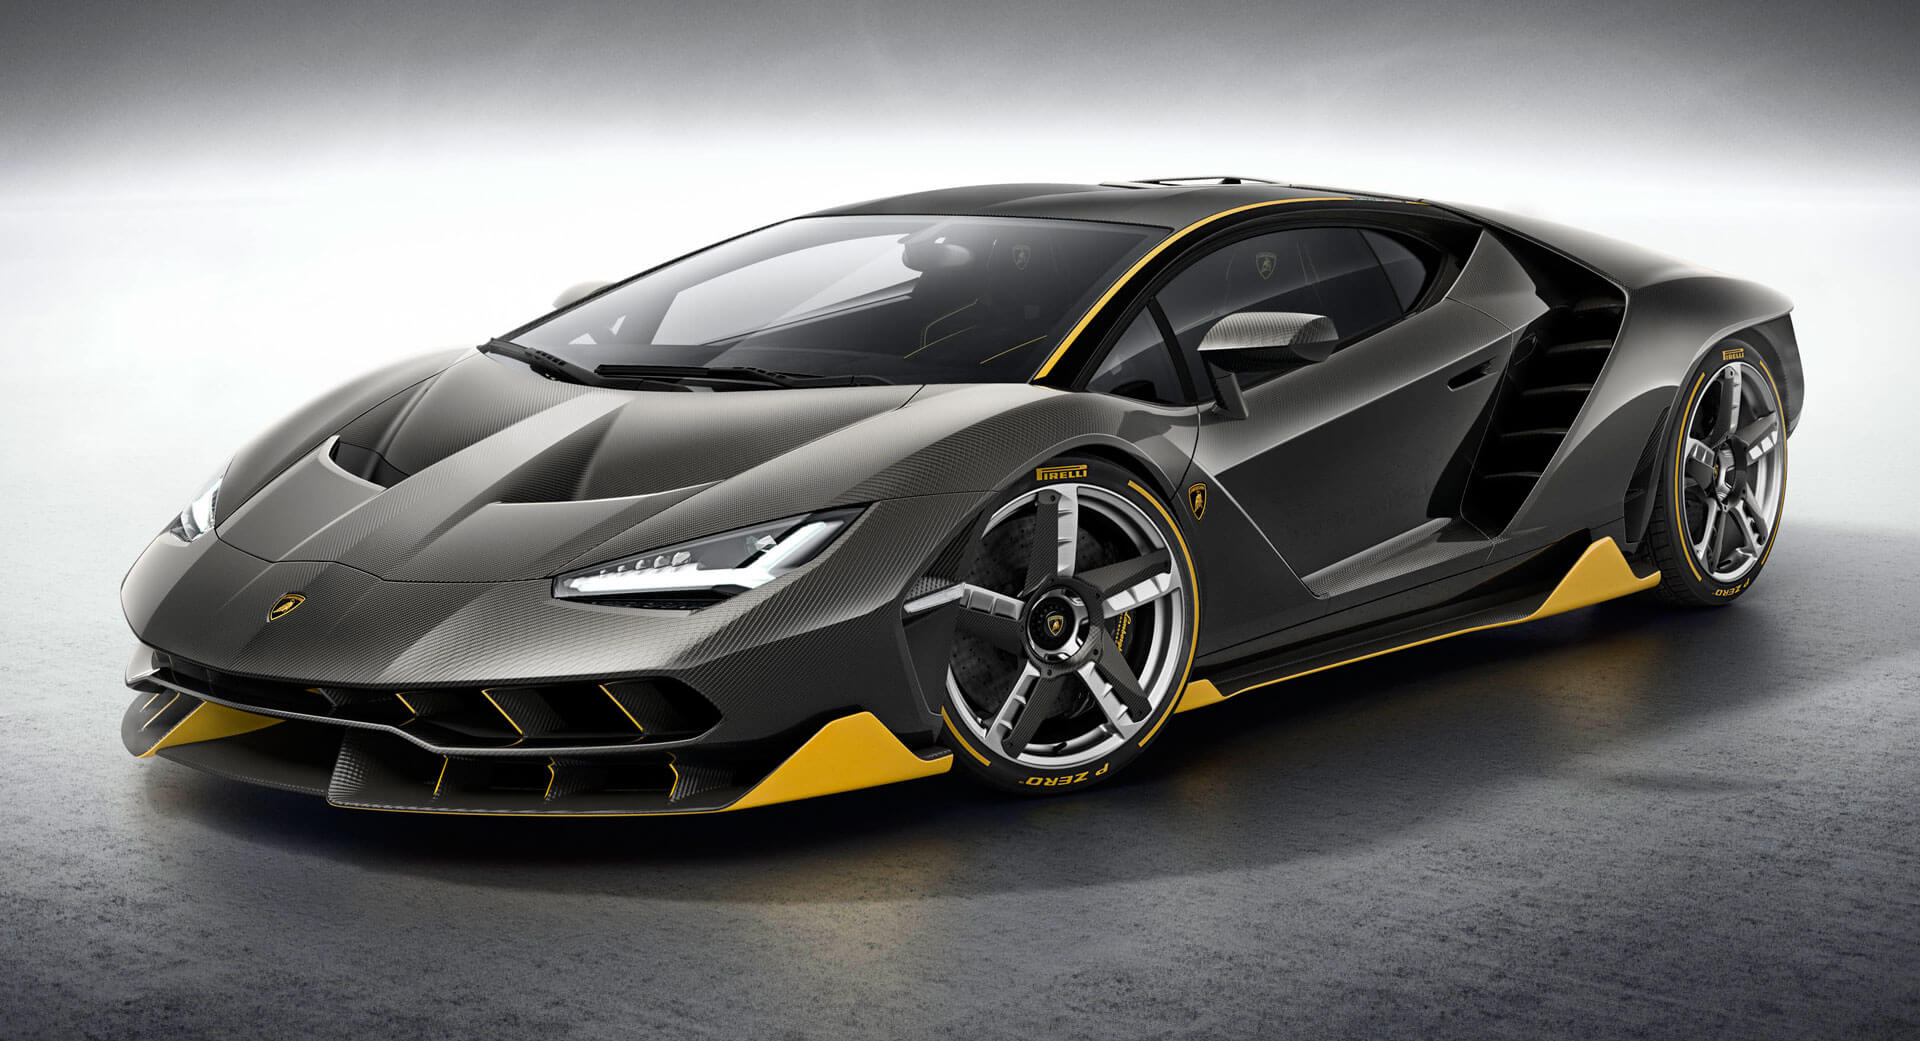 Lamborghini Partners With MIT To Develop High-Capacity, Fast-Charging Organic Battery Technology